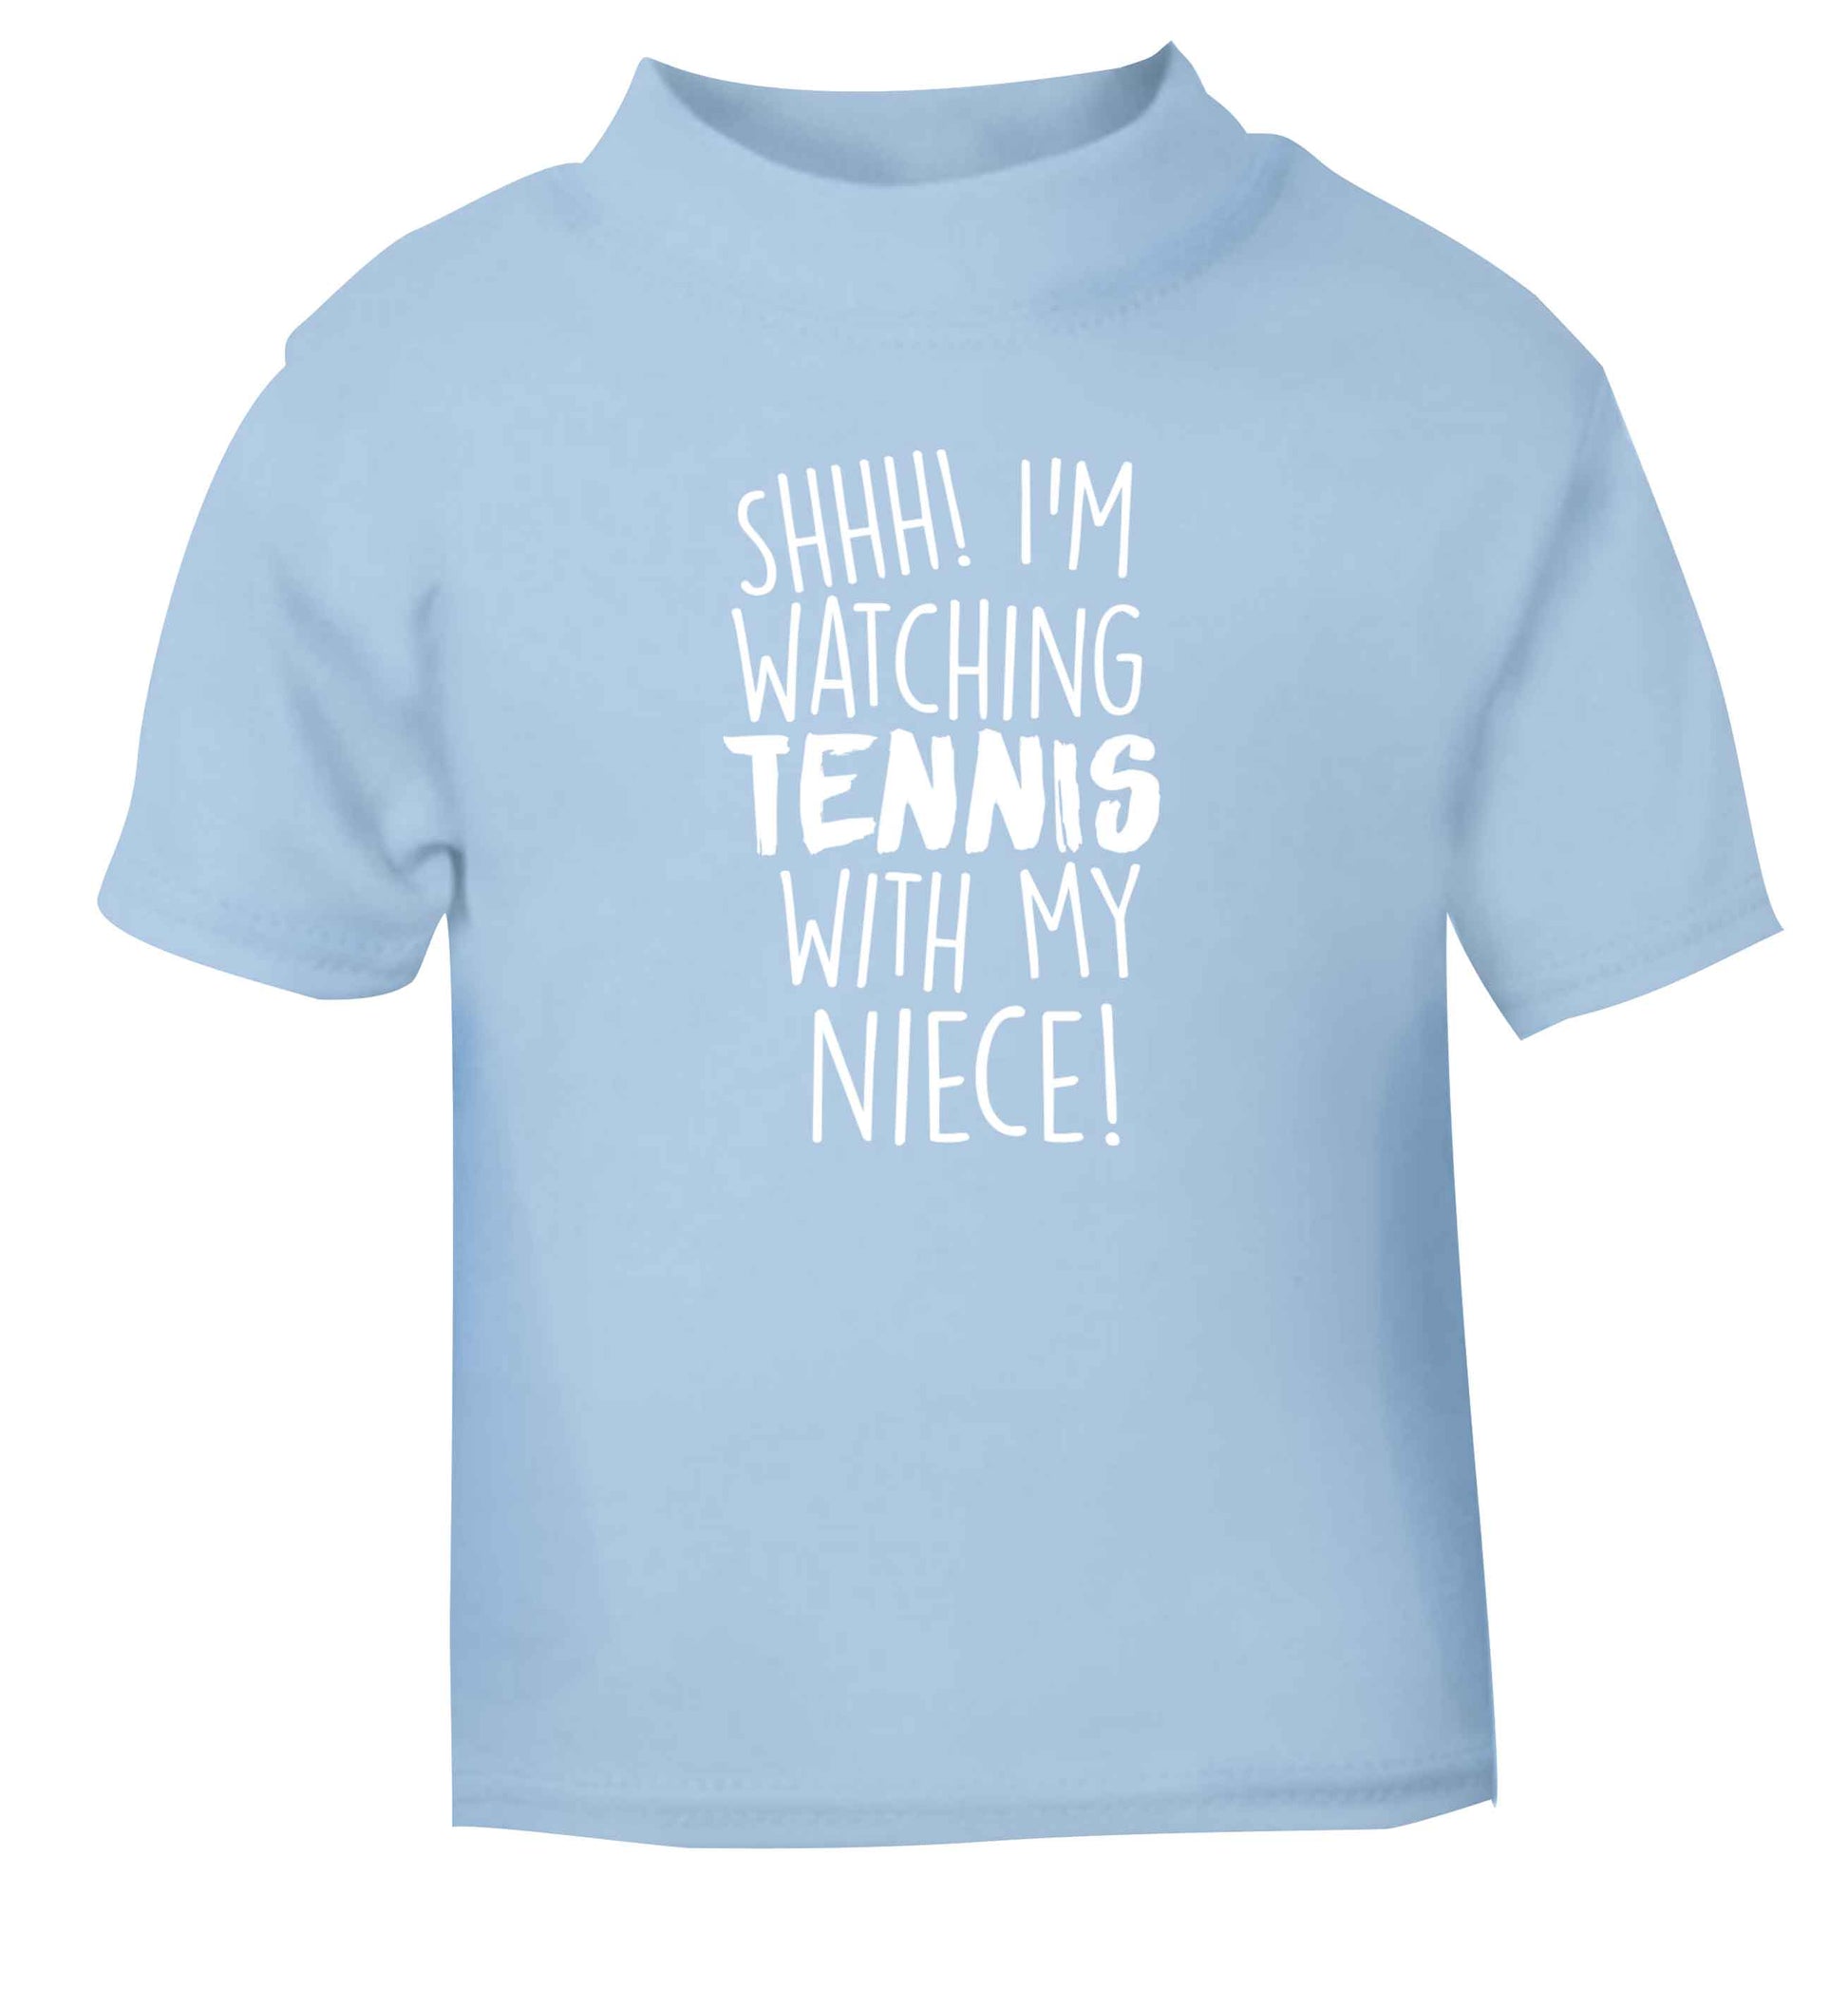 Shh! I'm watching tennis with my niece! light blue Baby Toddler Tshirt 2 Years